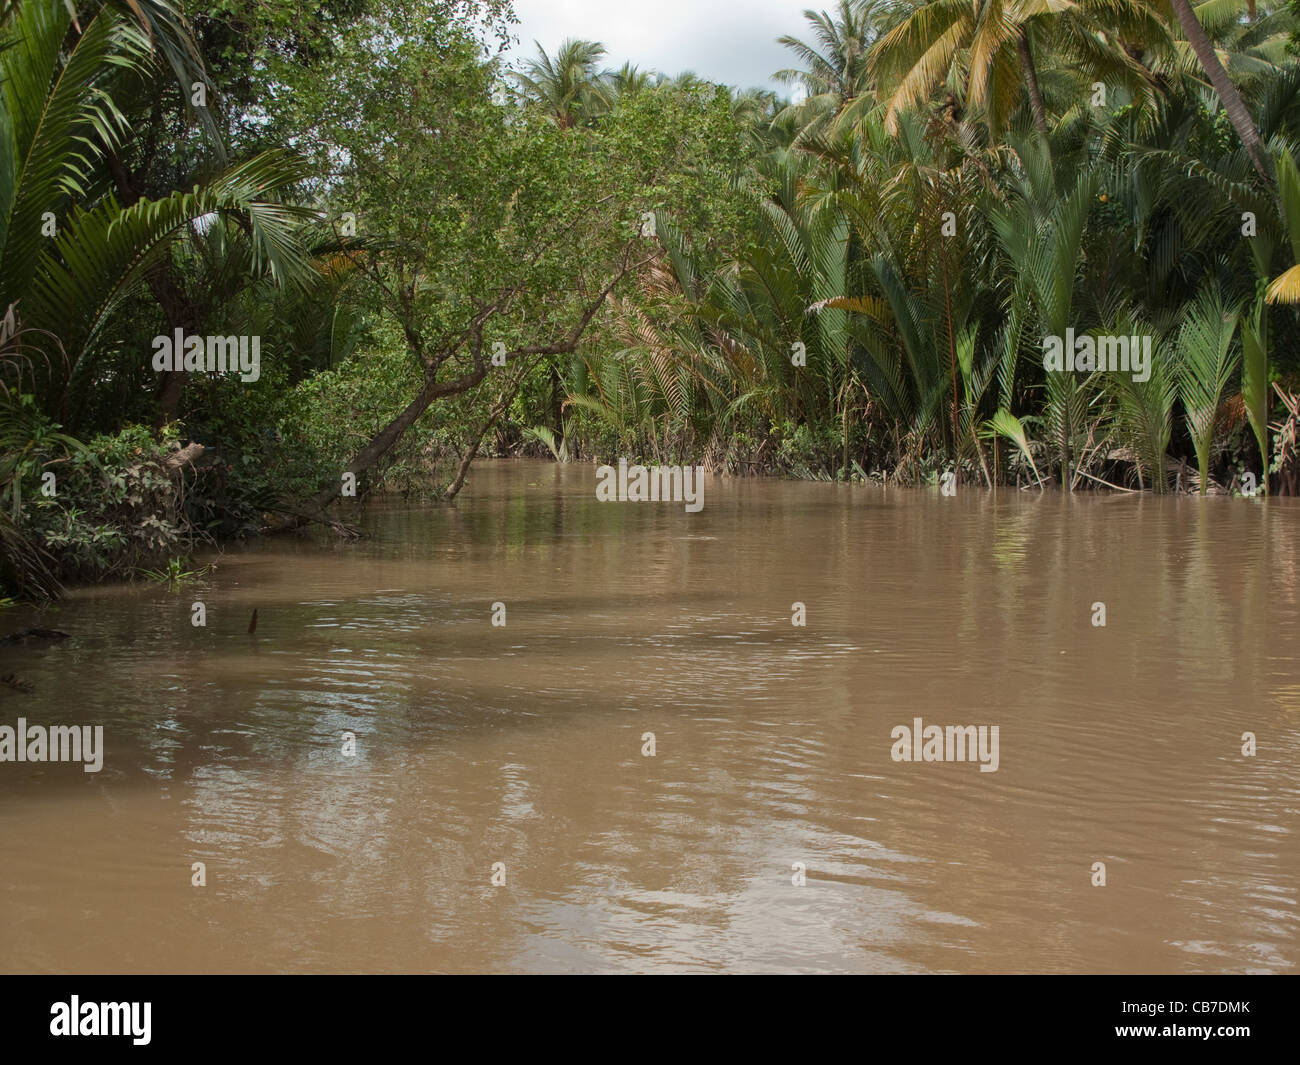 The River Mekong surrounded by dense jungle foliage, Mekong Delta ...